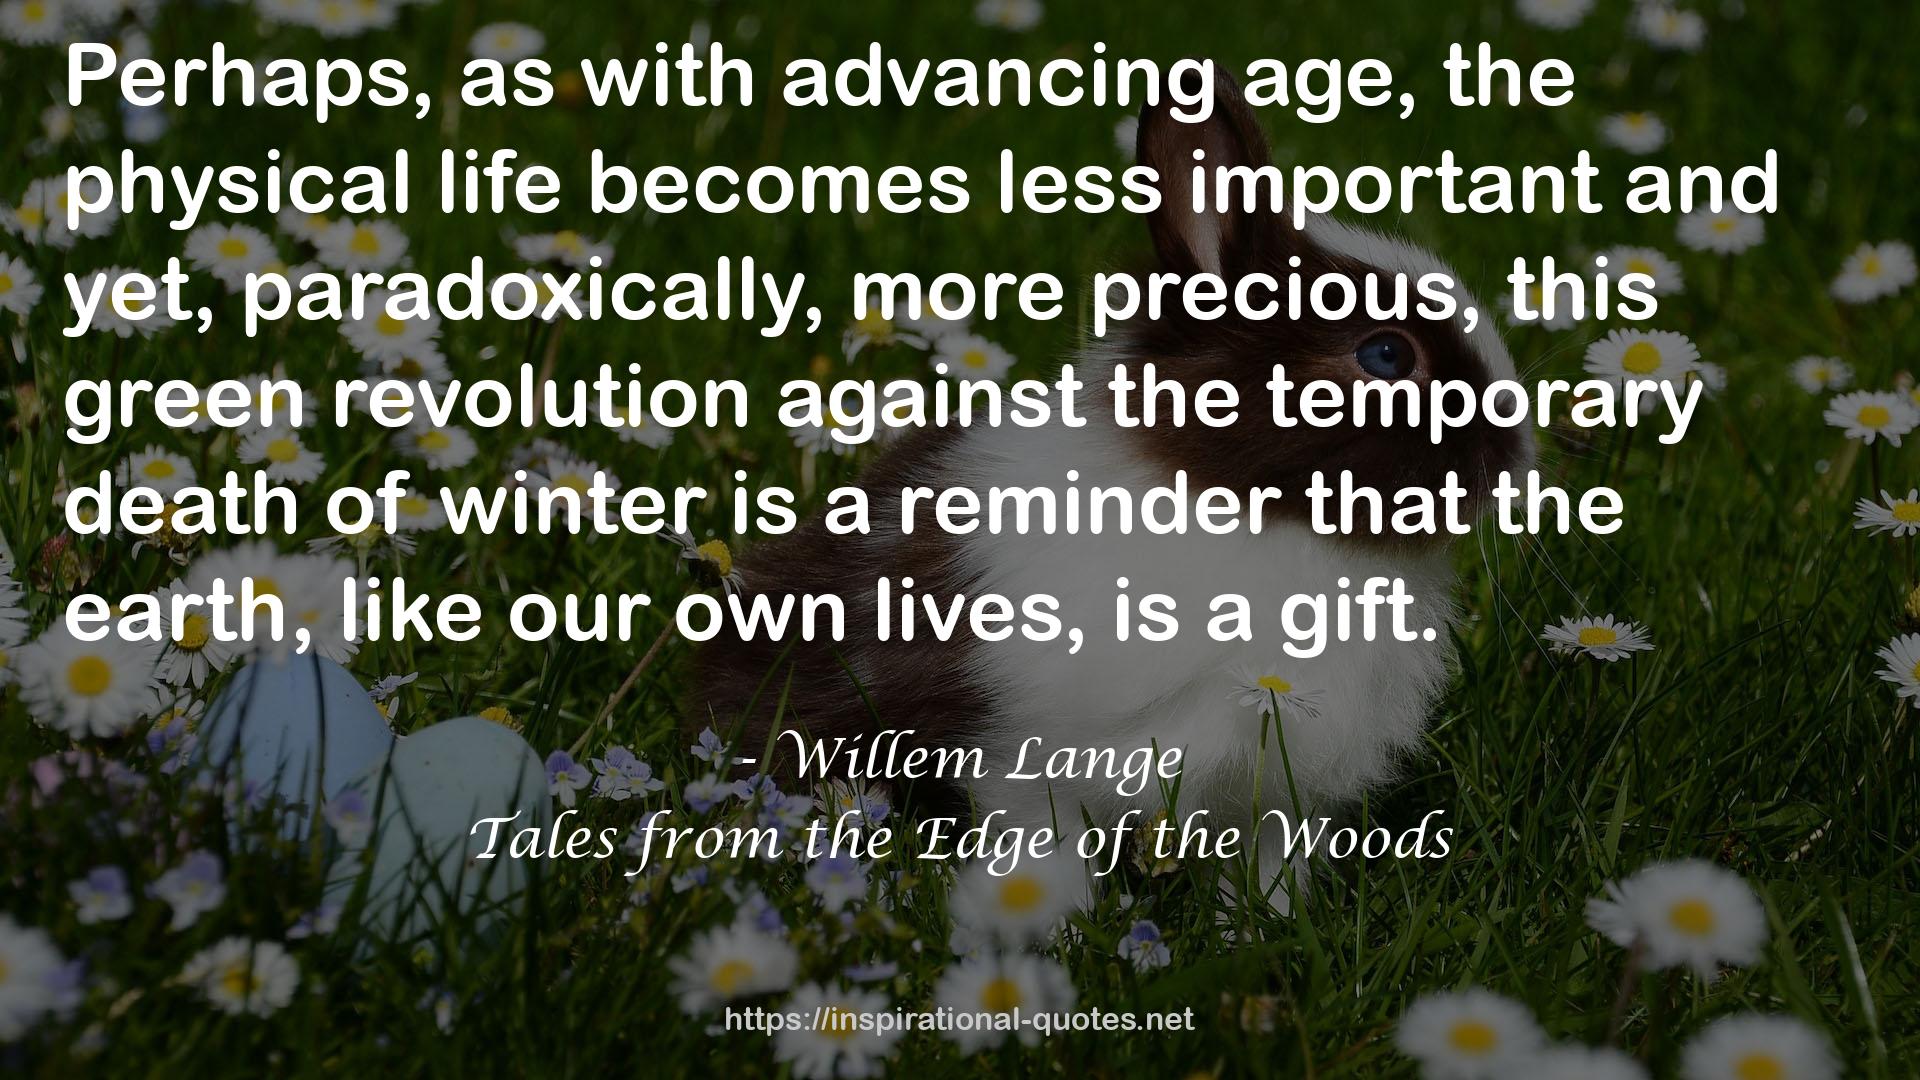 Tales from the Edge of the Woods QUOTES